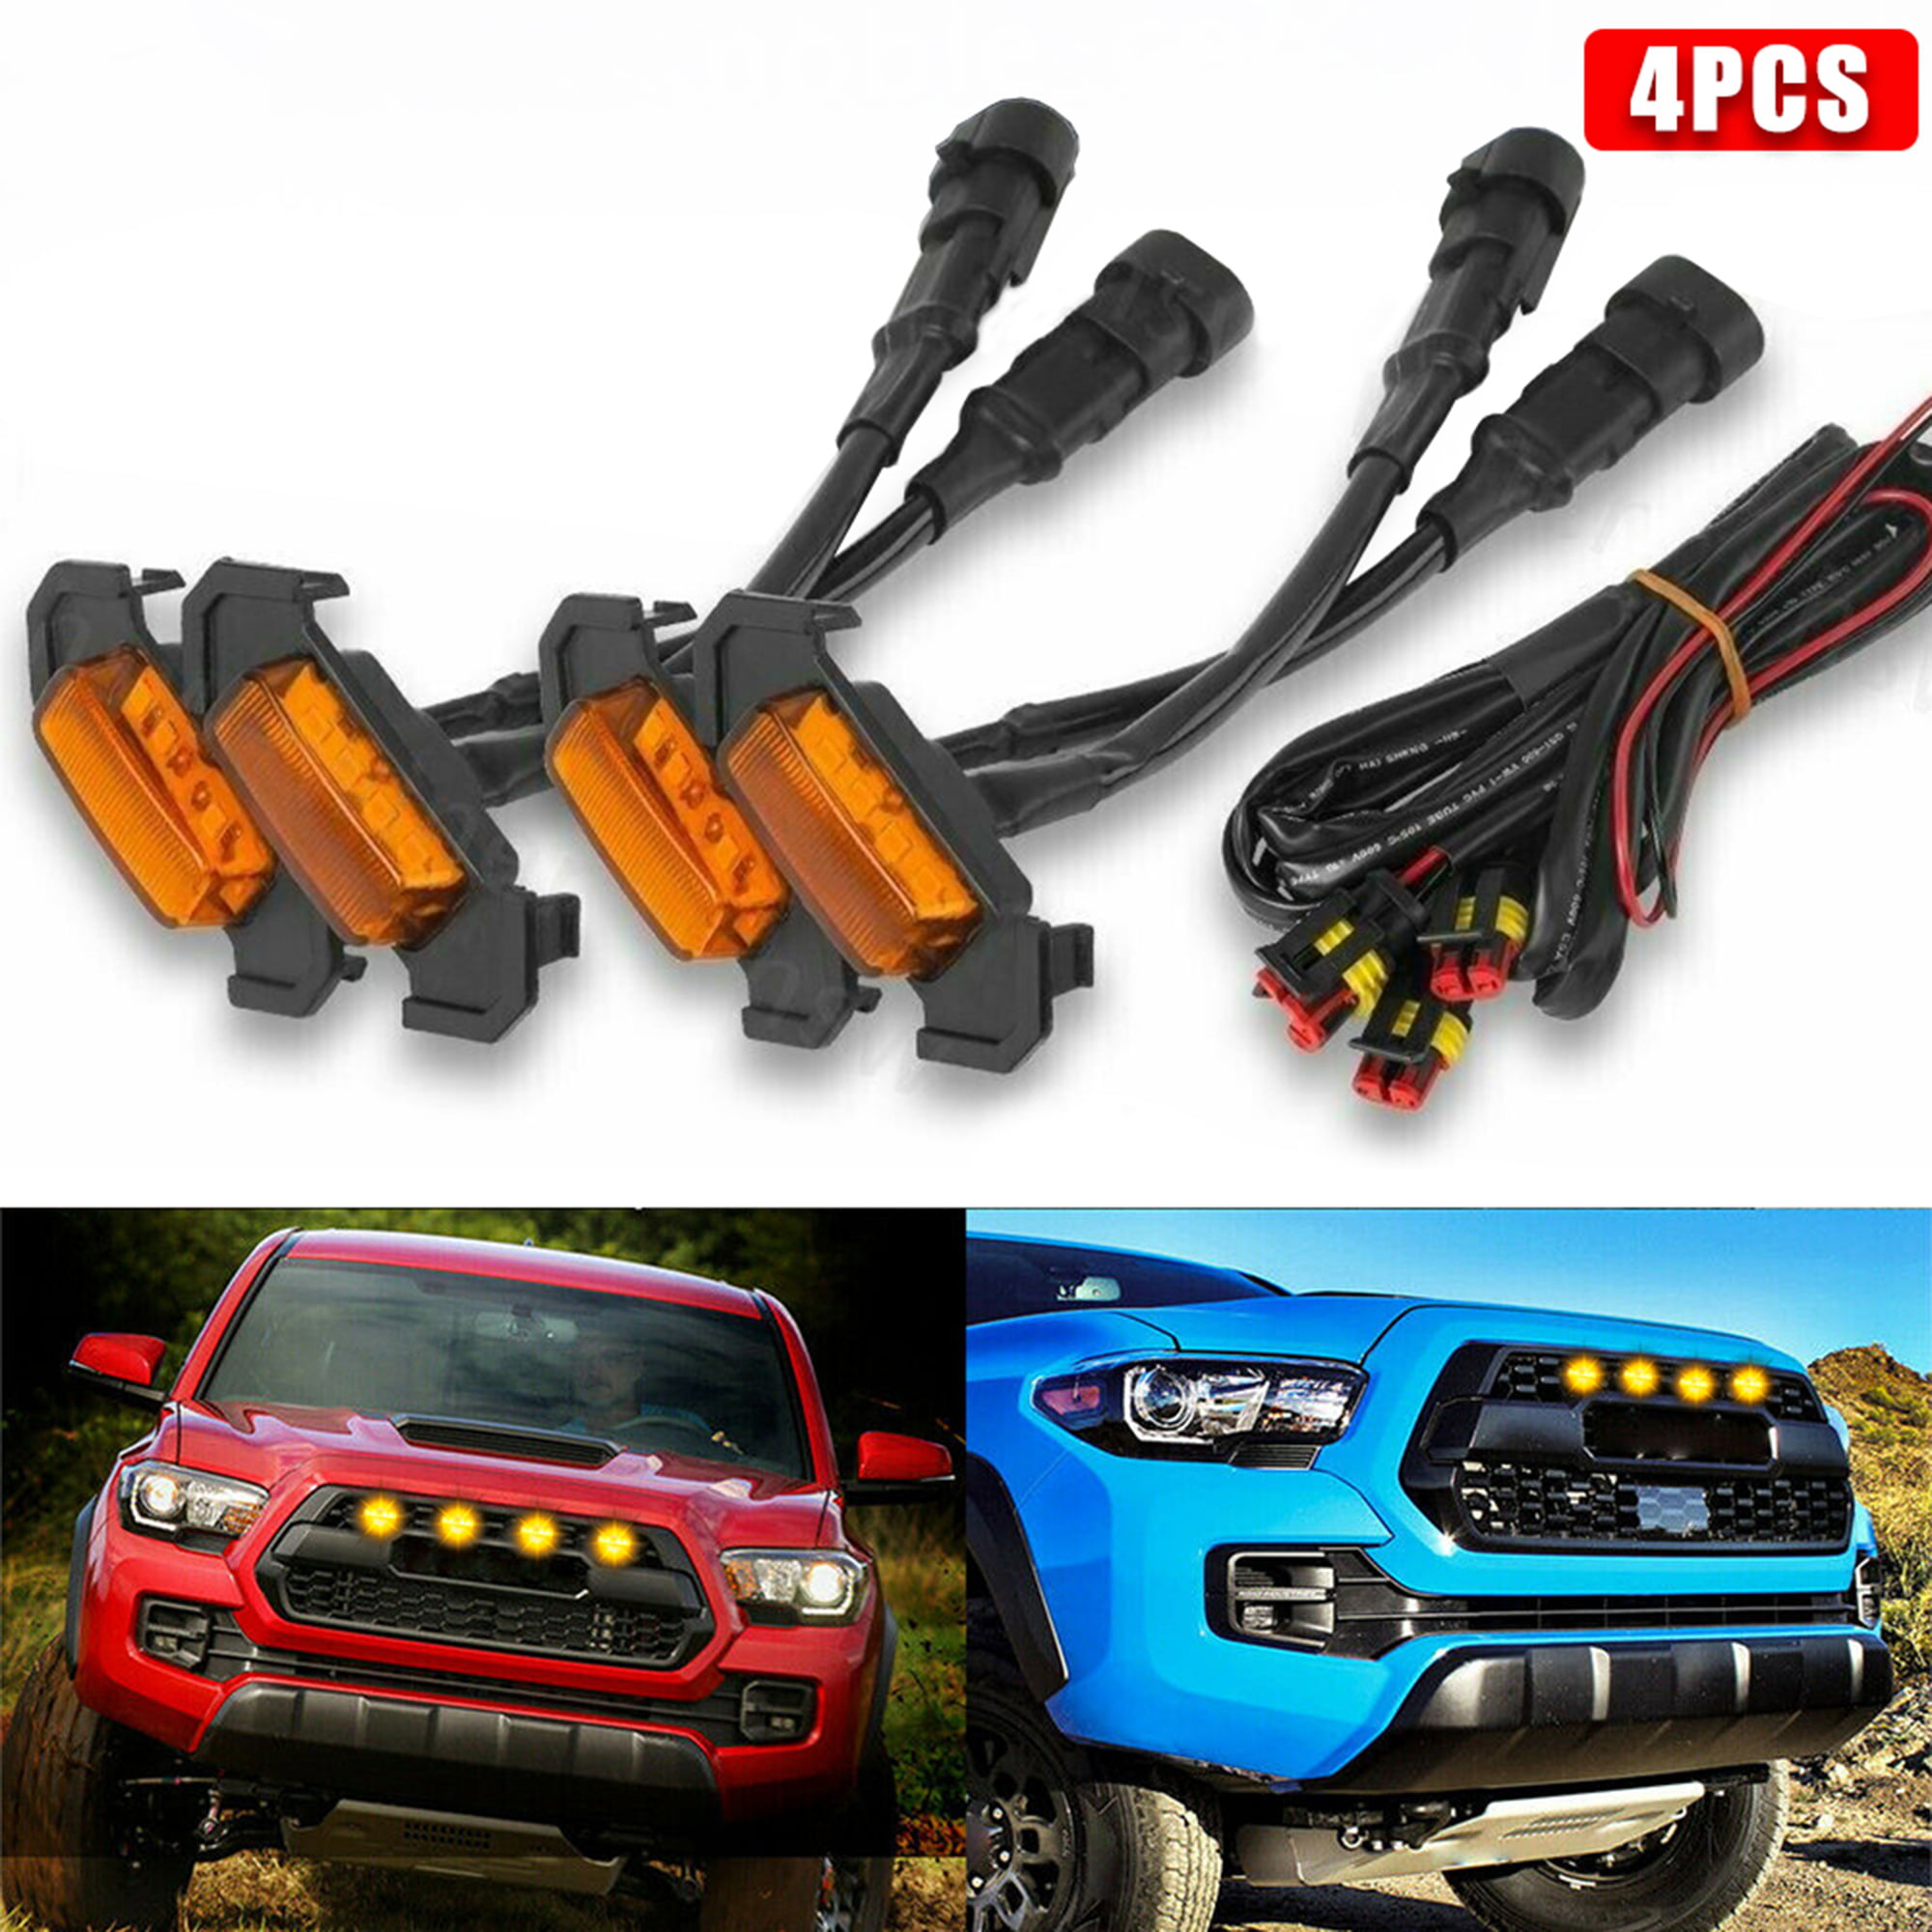 4 PCS with Fuse for 2016-2018 Aftermarket Toyota Tacoma TRD PRO Grille 